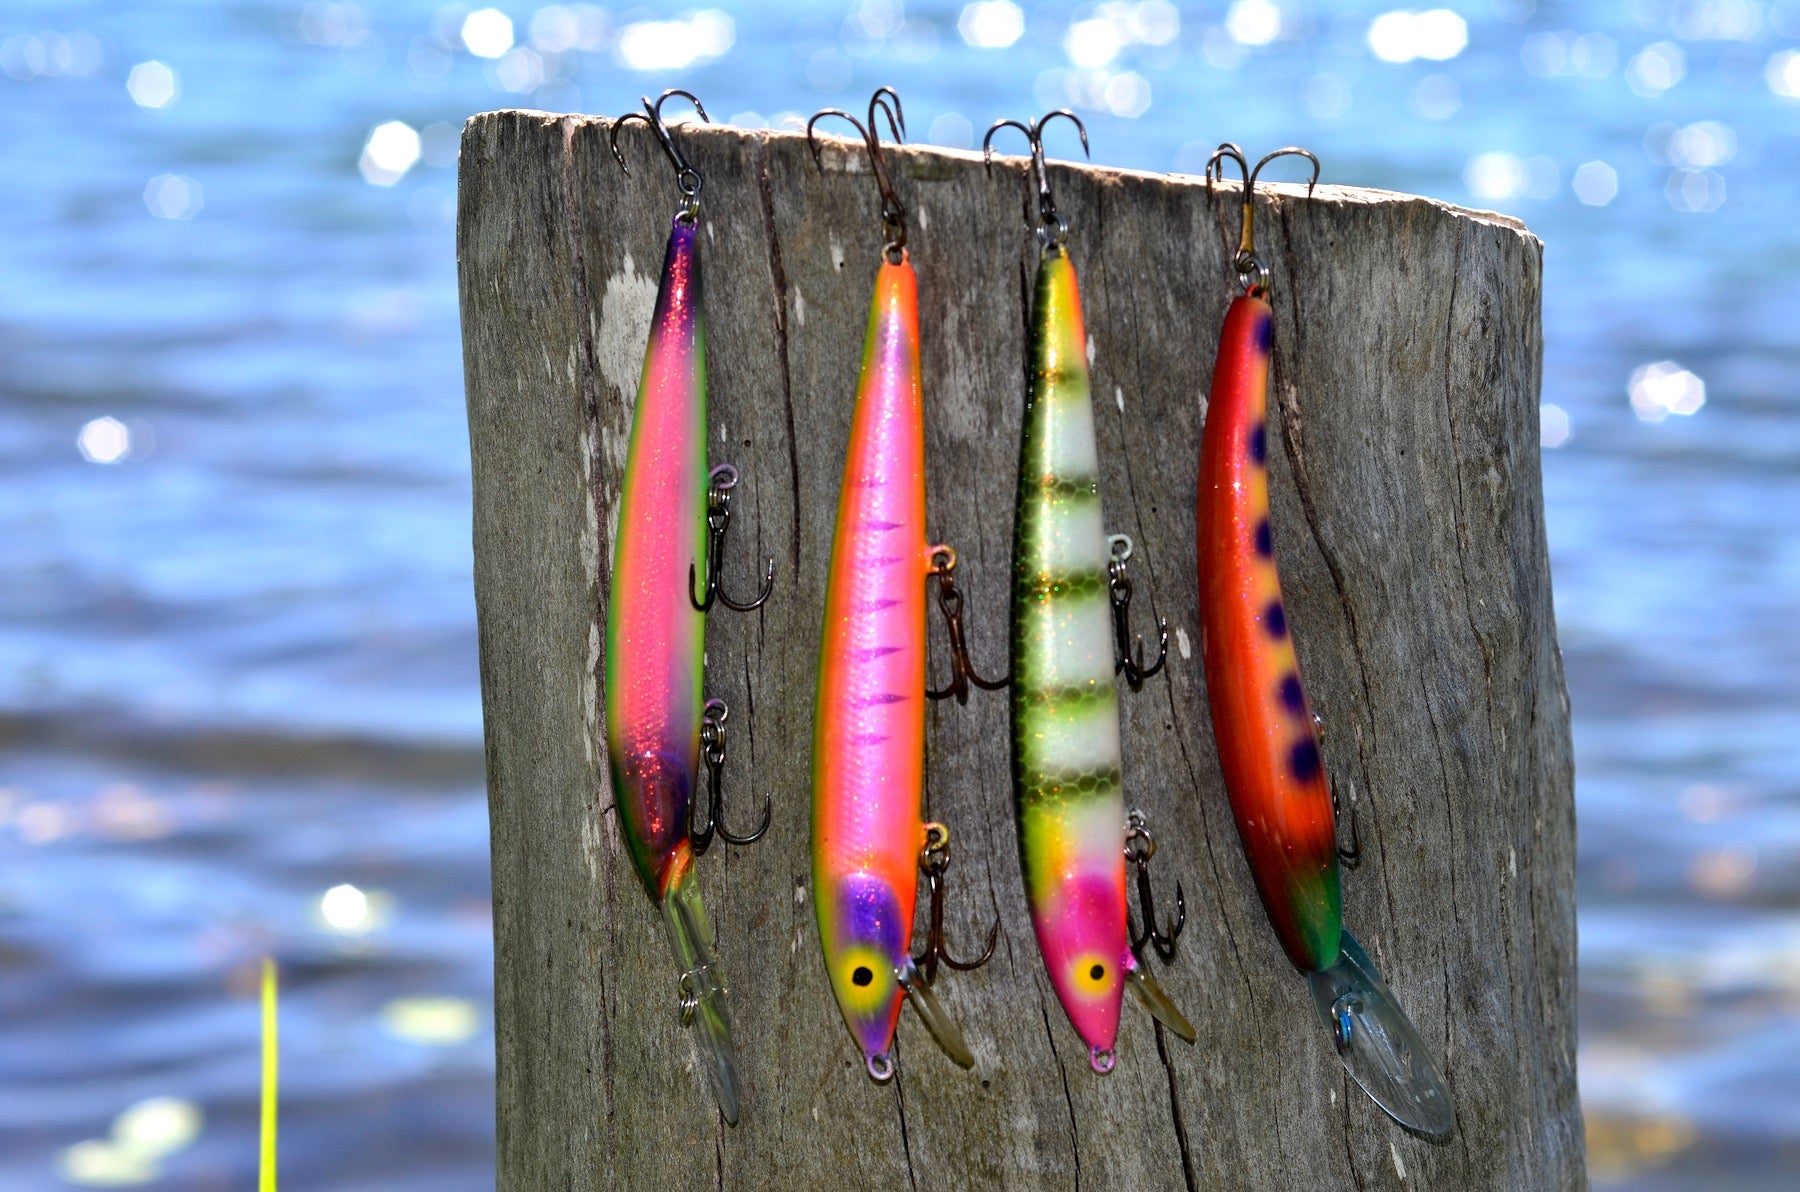 Sharp Hooks, More Fish. Use VMC® Replacement Hooks for Rapala